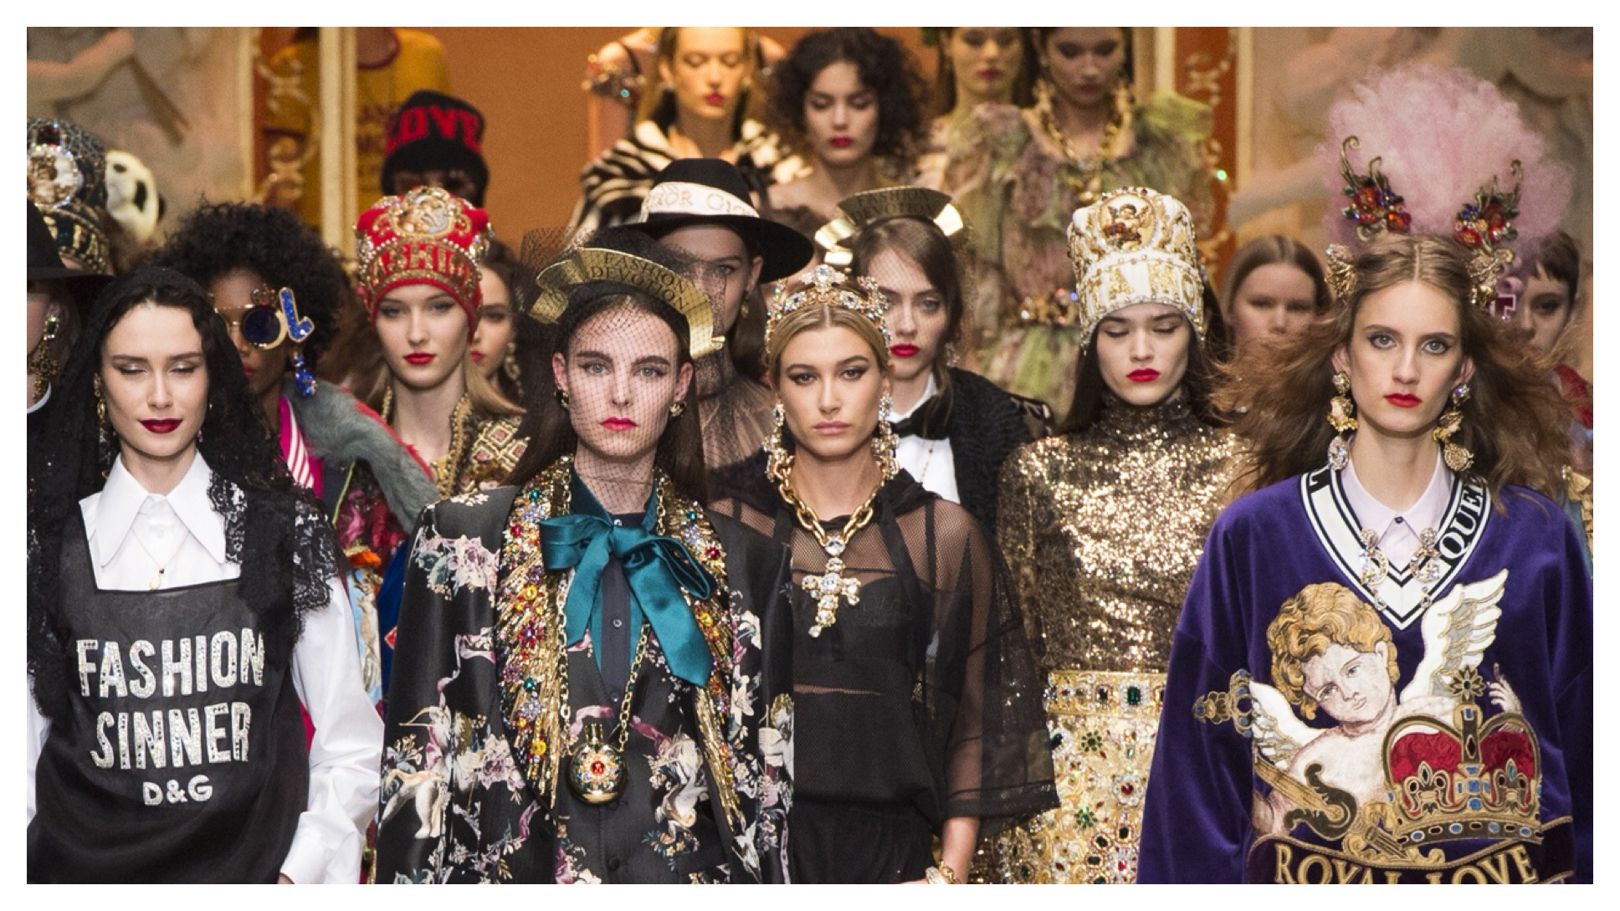 VOGUE - #SuzyMFW: For Dolce & Gabbana, God is in the Details